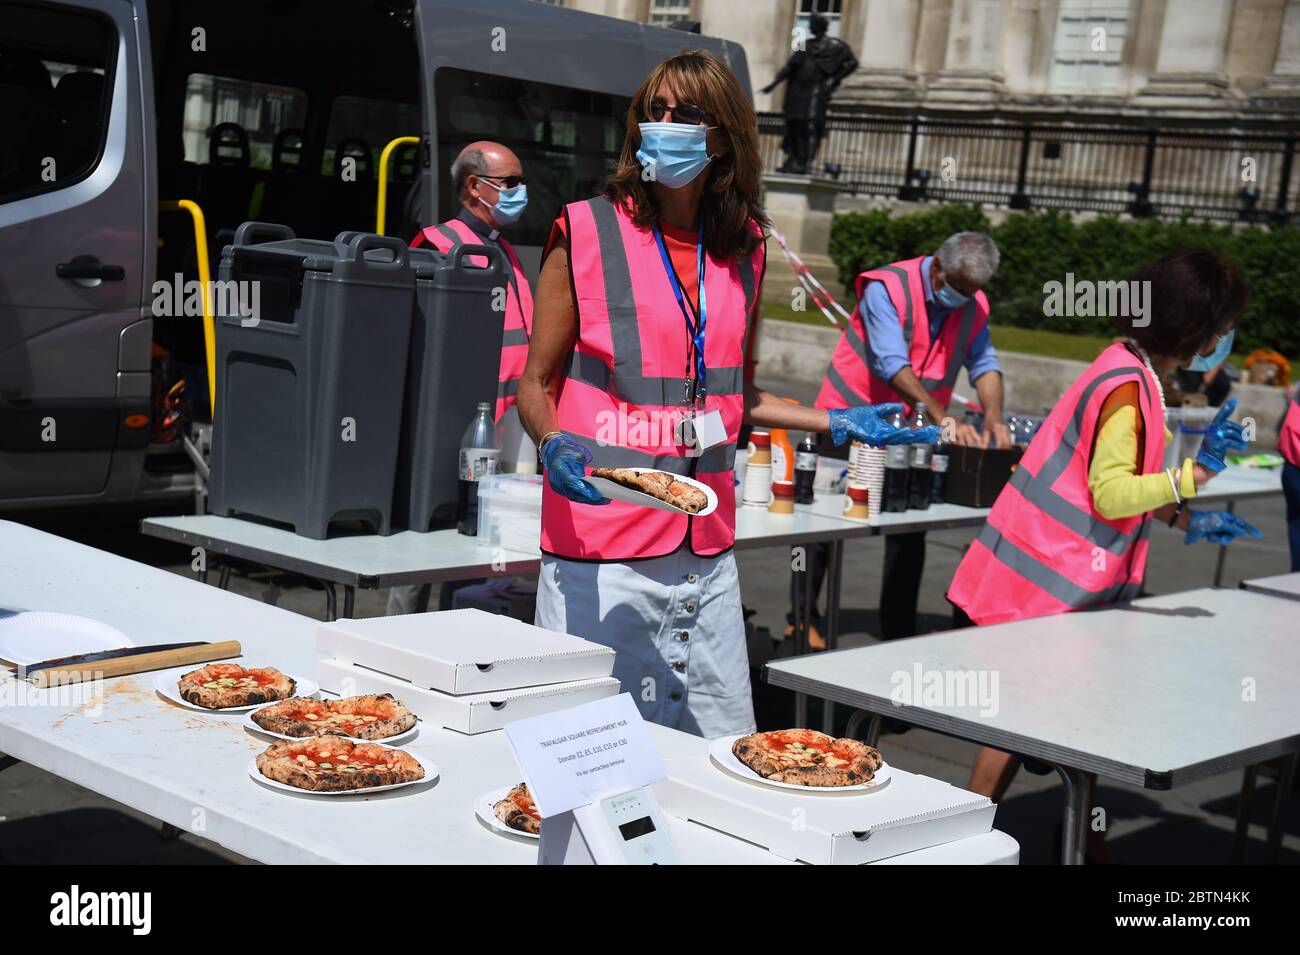 Pandemic Pizza staff serve pizzas in Trafalgar Square, London, where Pandemic Pizza and Trafalgar Square Refreshment Hub have teamed up to provide homeless people with refreshments, after the introduction of measures to bring the country out of lockdown. Stock Photo